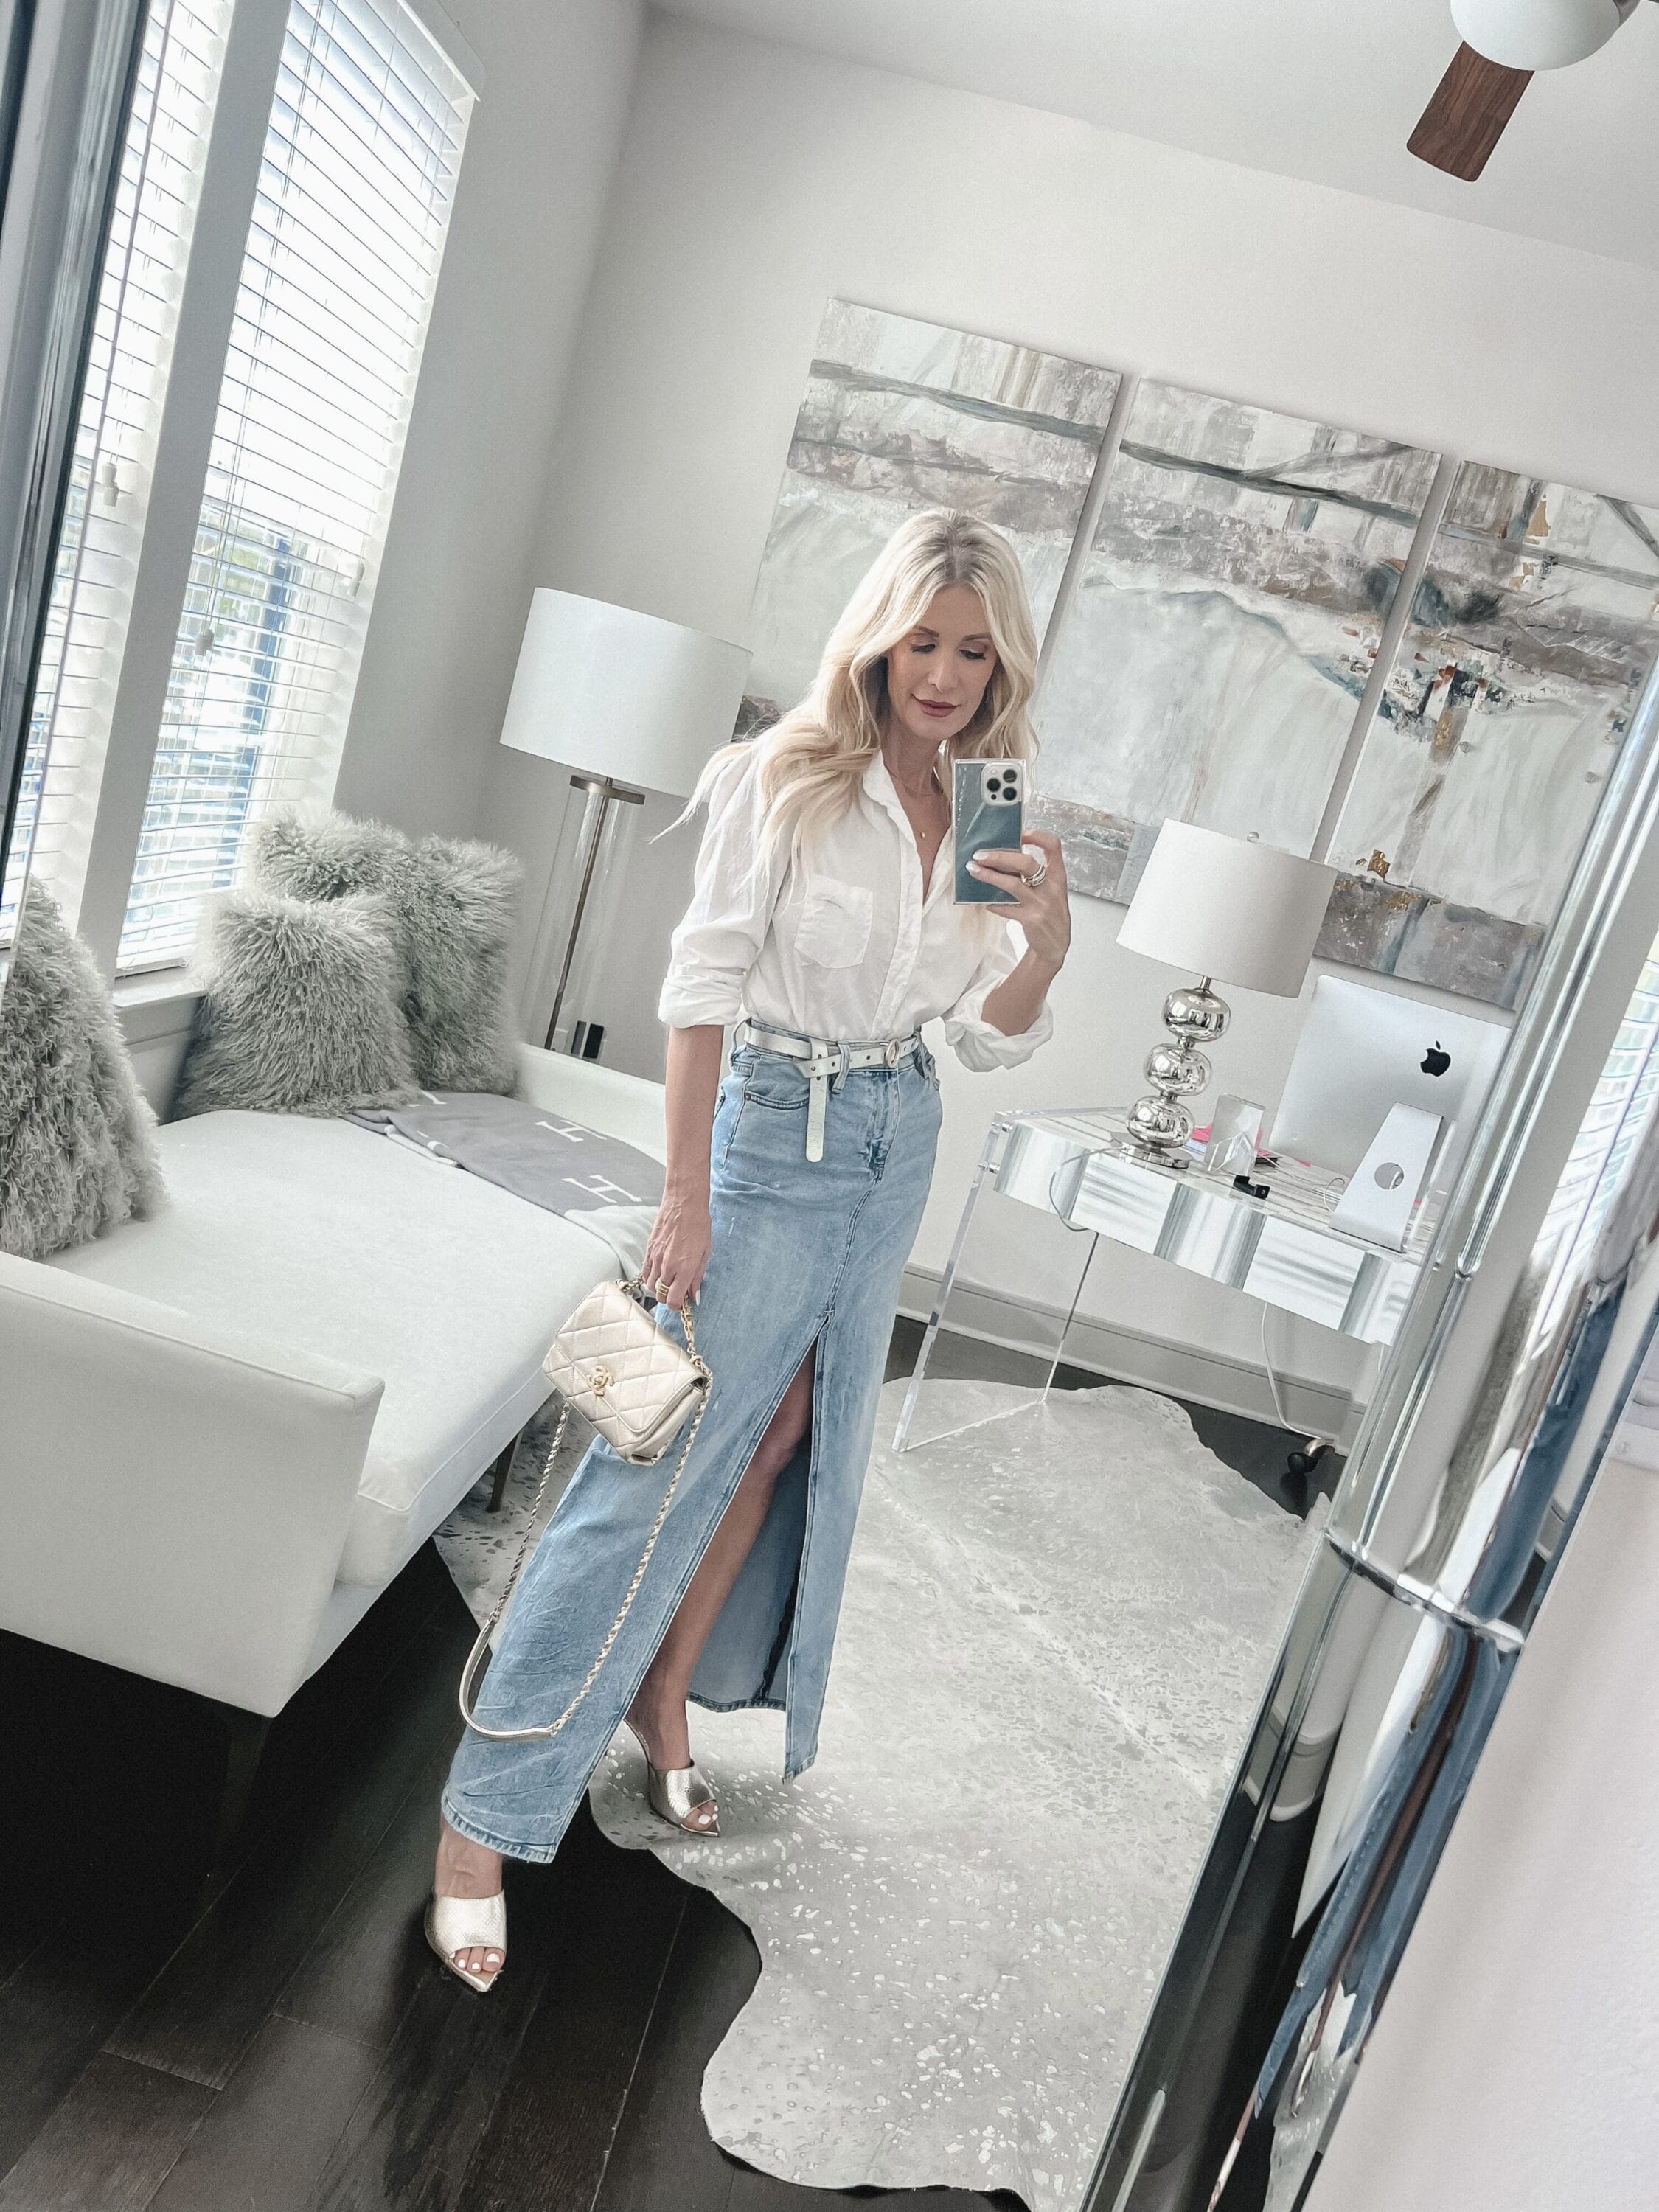 Over 40 fashion influencer from Dallas wearing the top spring denim trends of 2023 in the form of a denim midi skirt.